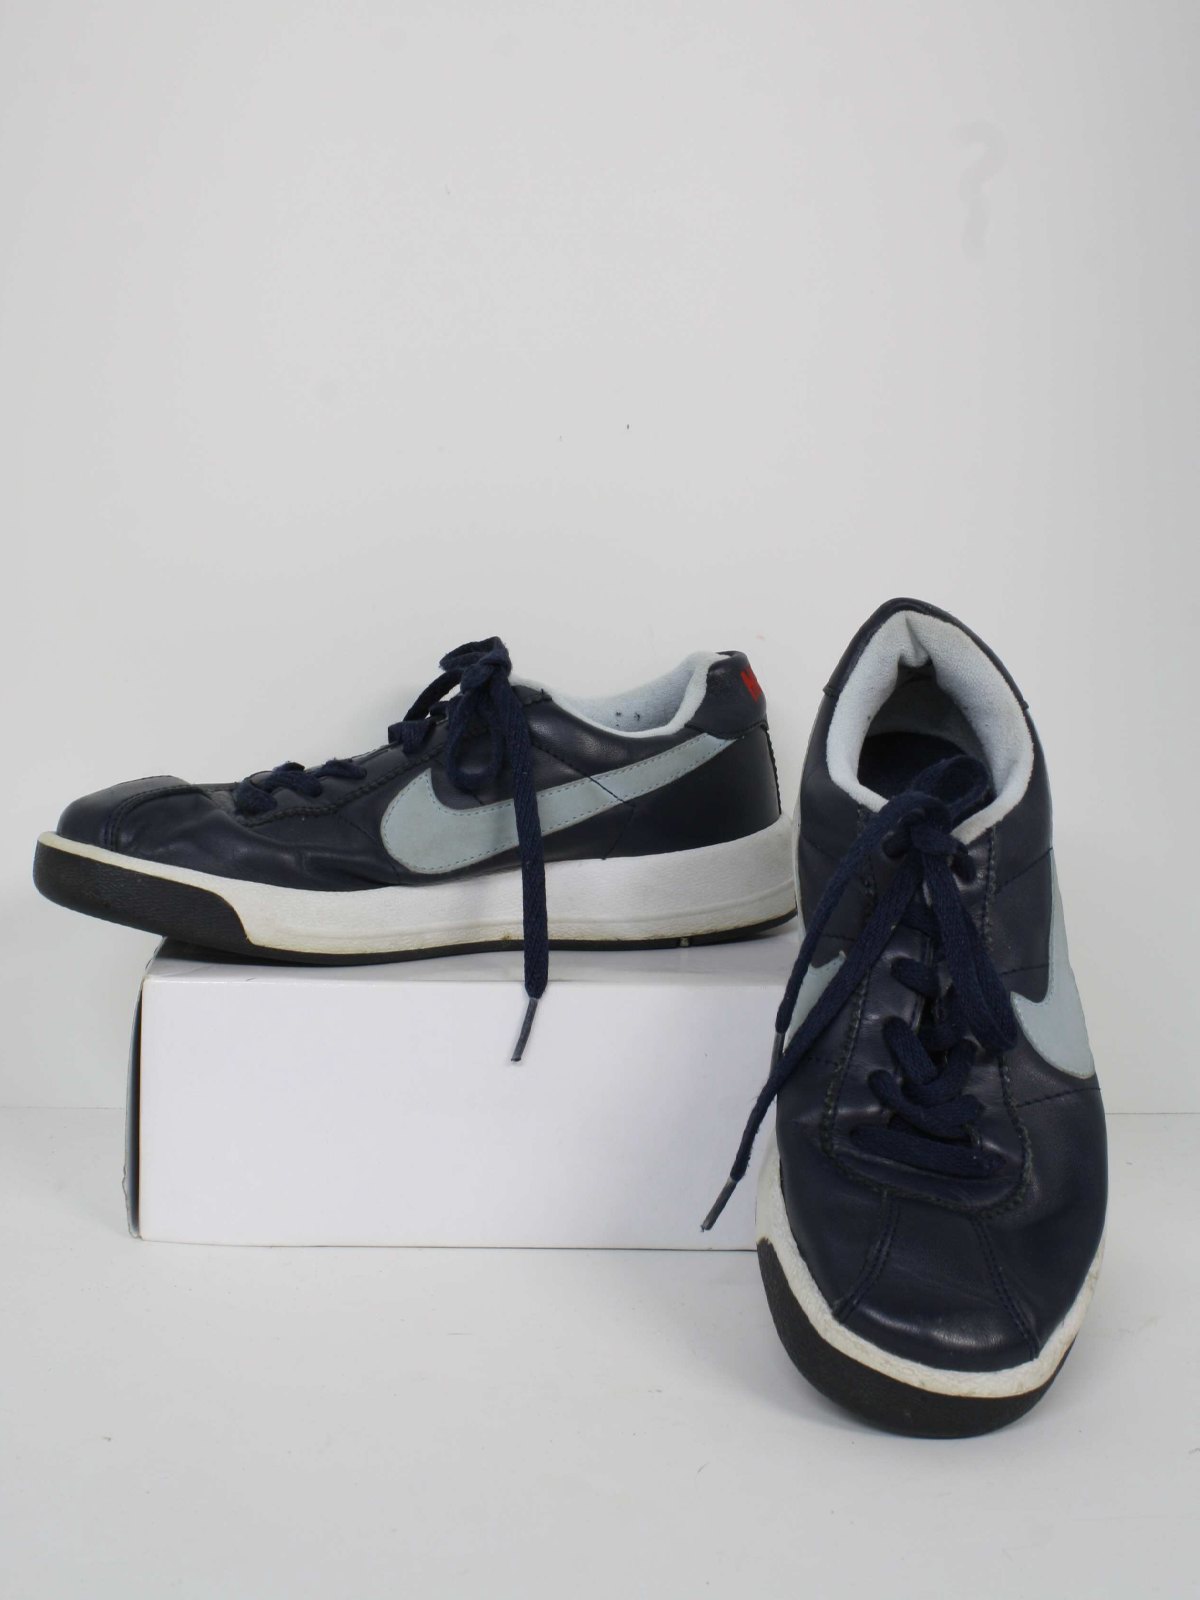 mens old school nike shoes